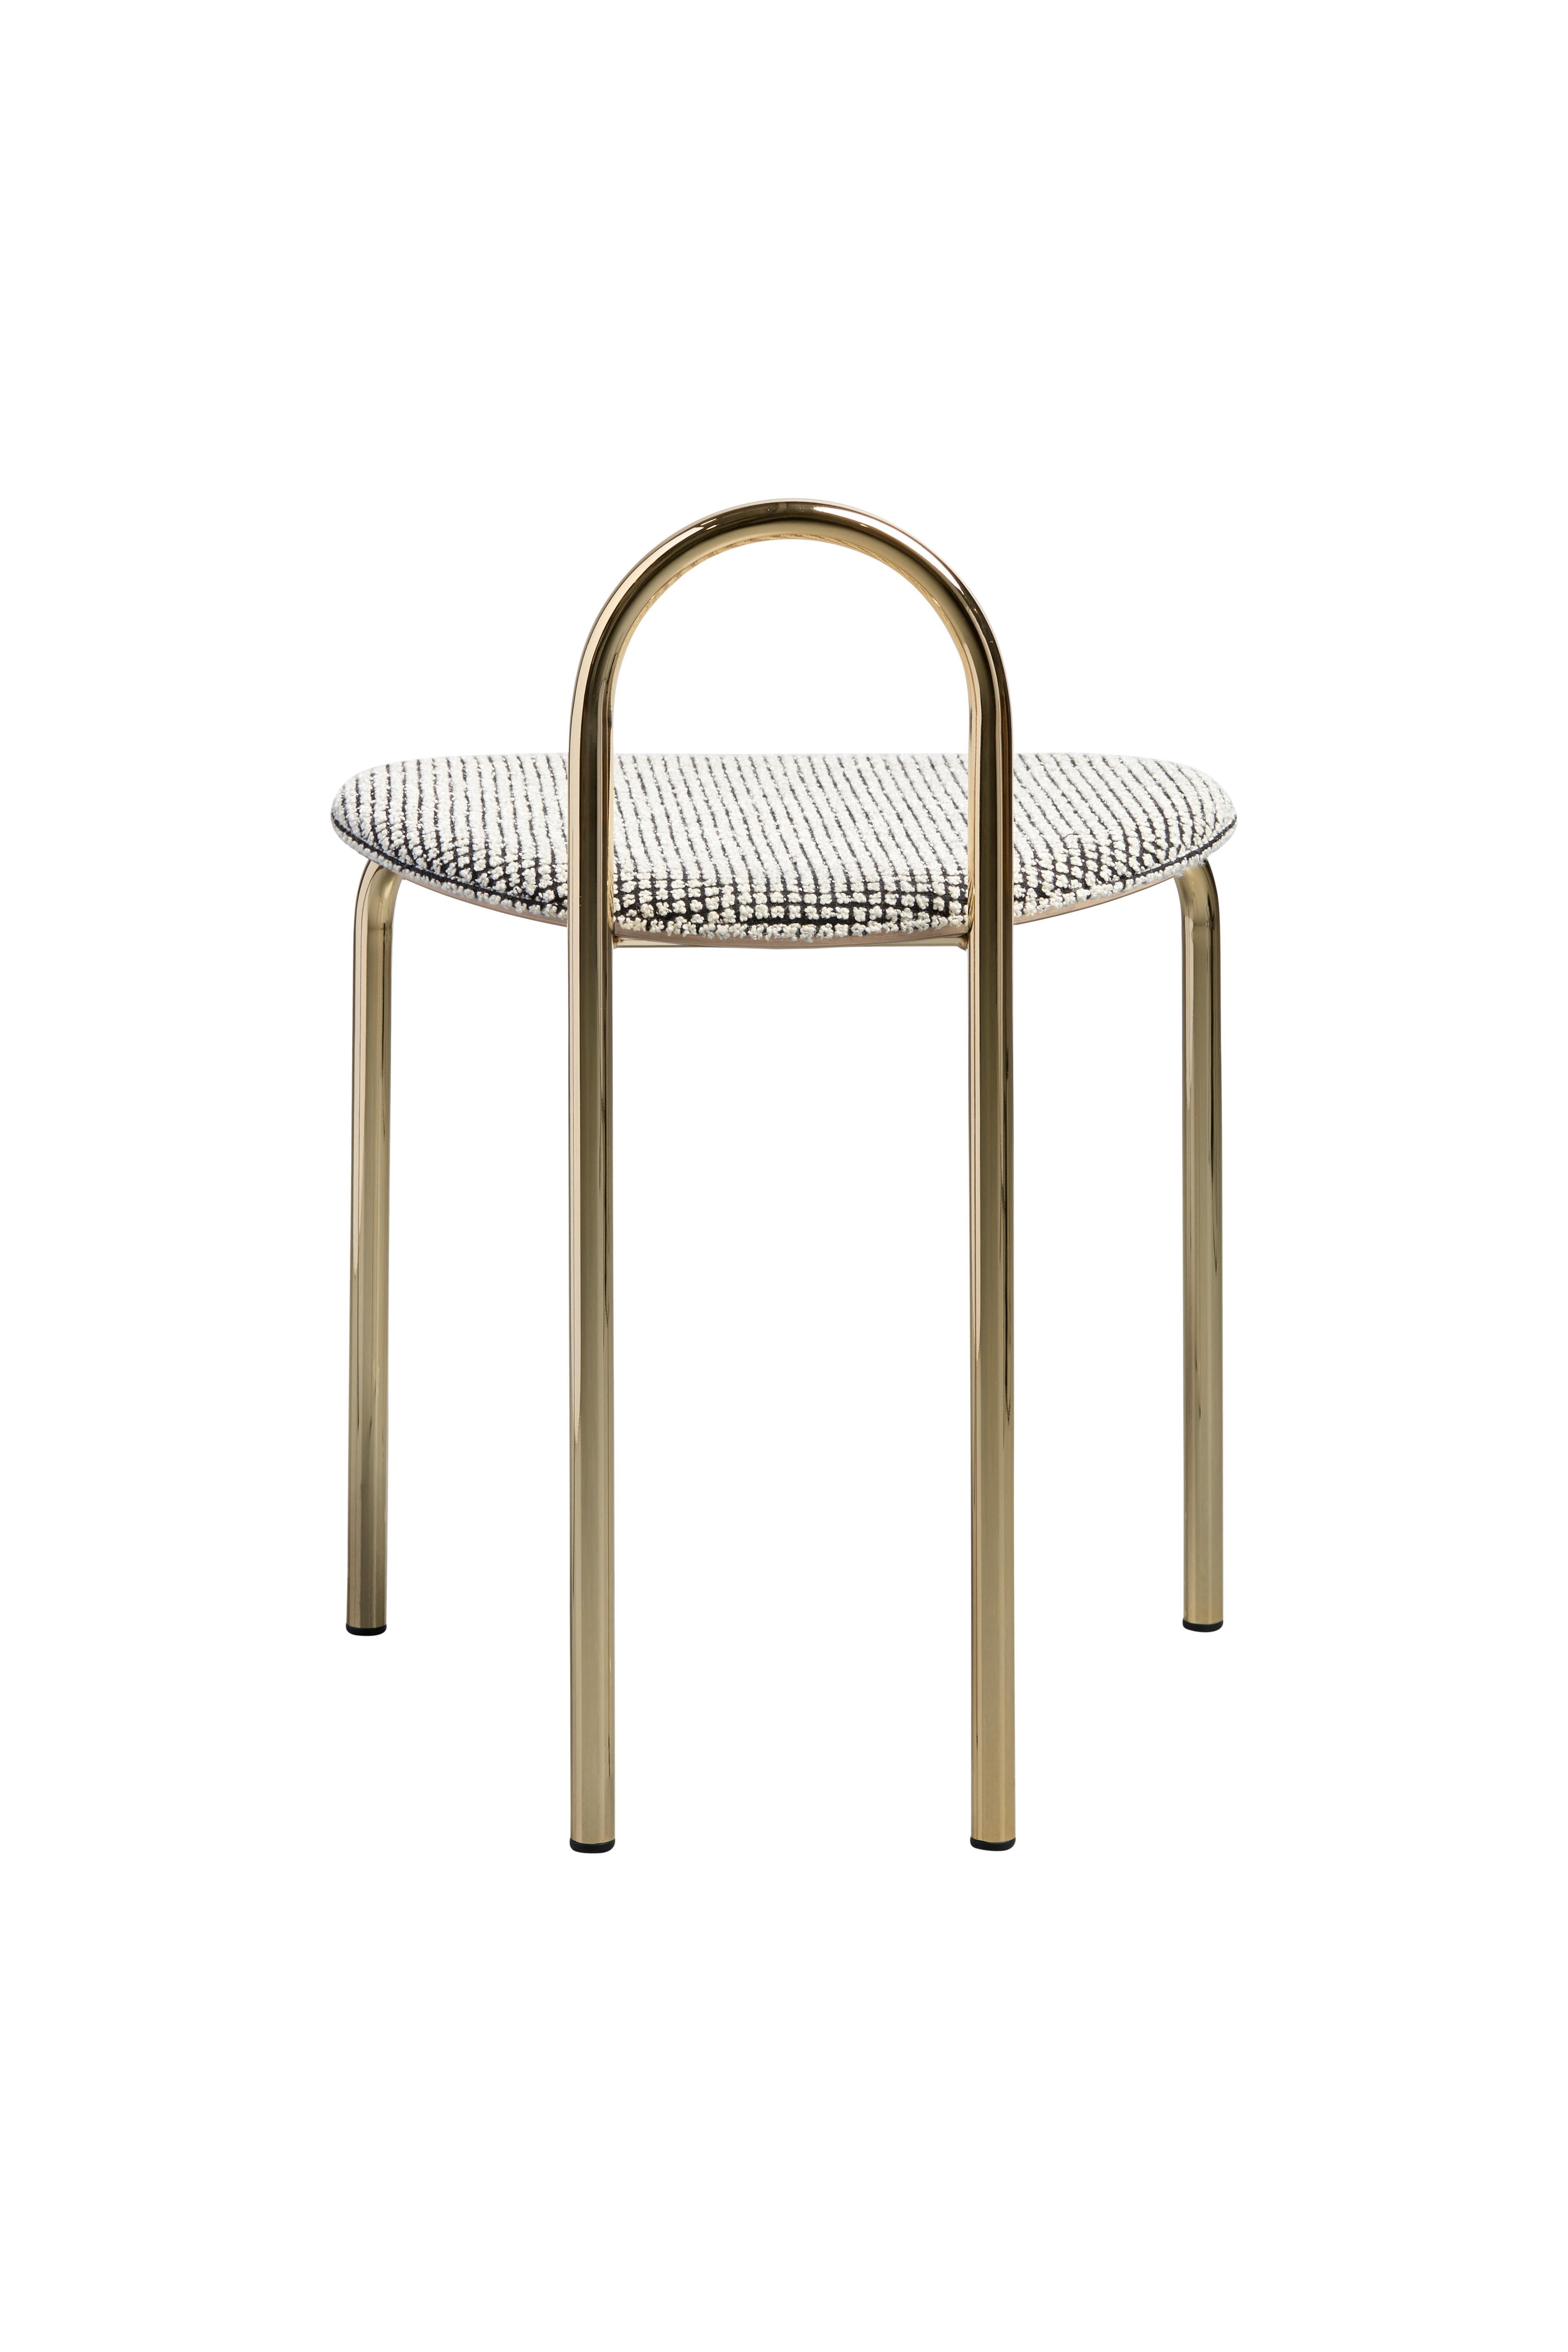 Italian SP01 Michelle Stool Upholstered in Gold Chrome, Made in Italy For Sale